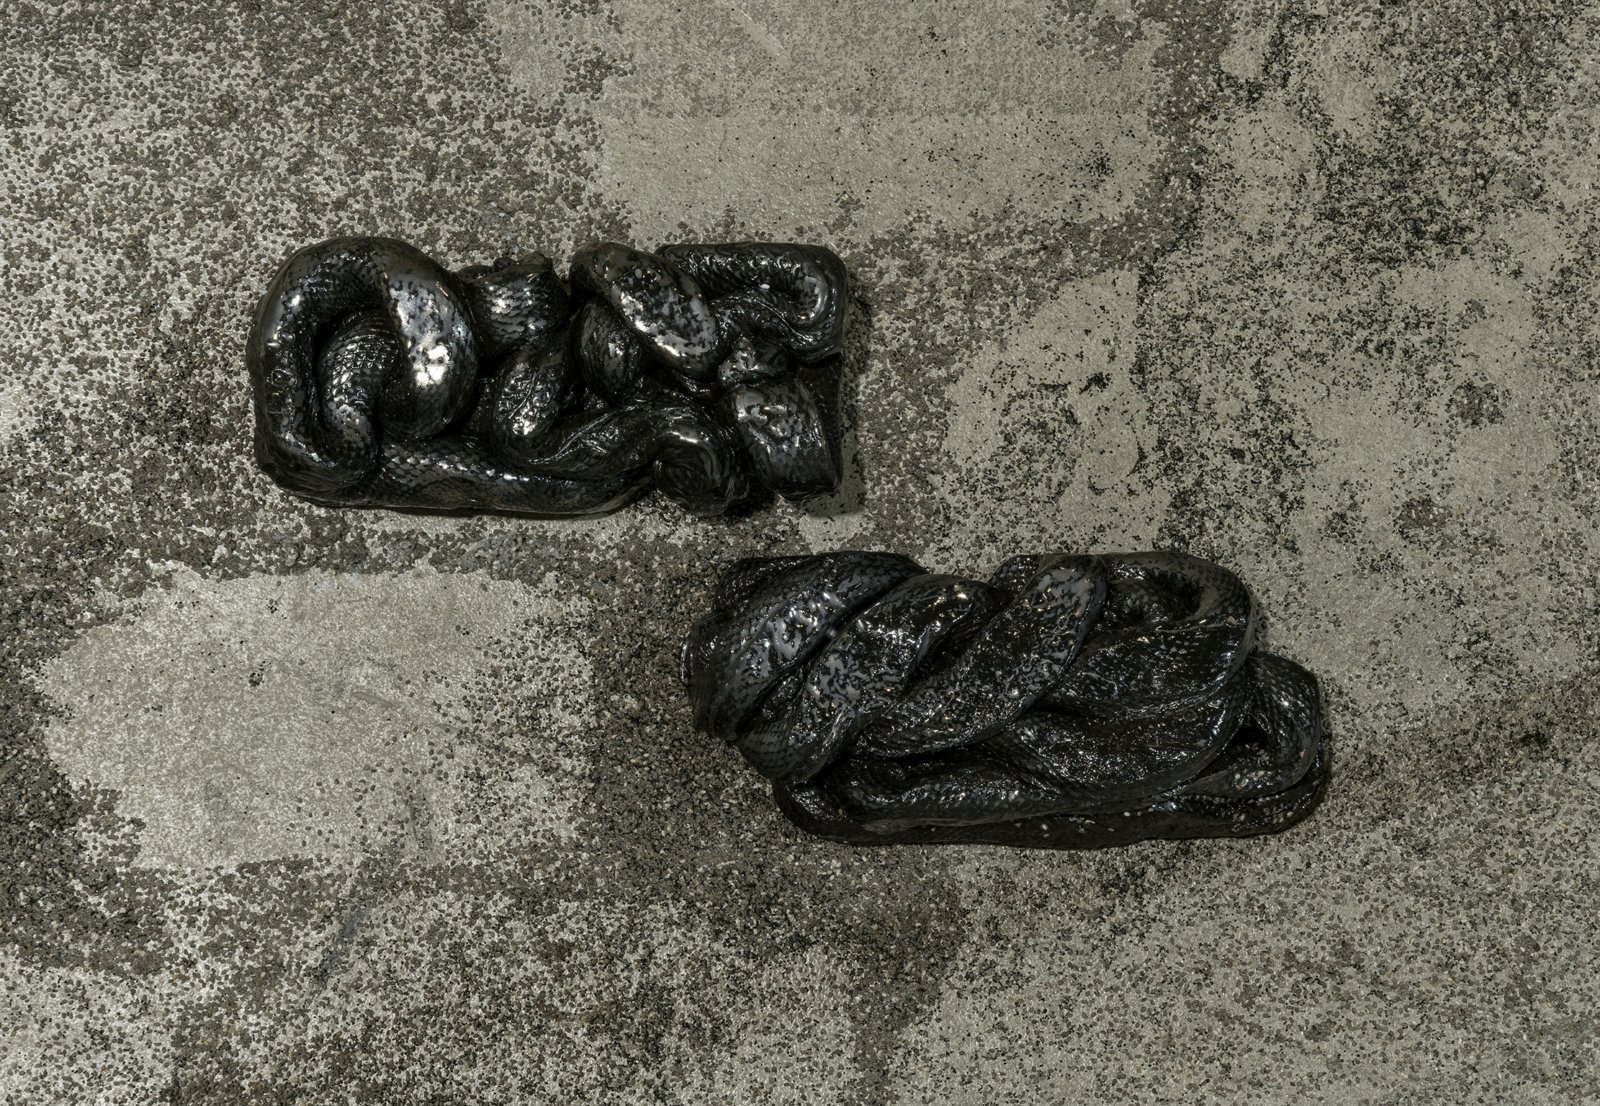 Rochelle Goldberg, The Mirror Isn’t Finished (detail), 2016, steel, ceramic, chia, coal slag, 84 x 84 x 84 in. (213 x 213 x 213 cm). Installation view, A Worm Filled Body, Parisian Laundry, Montreal, Canada, 2016